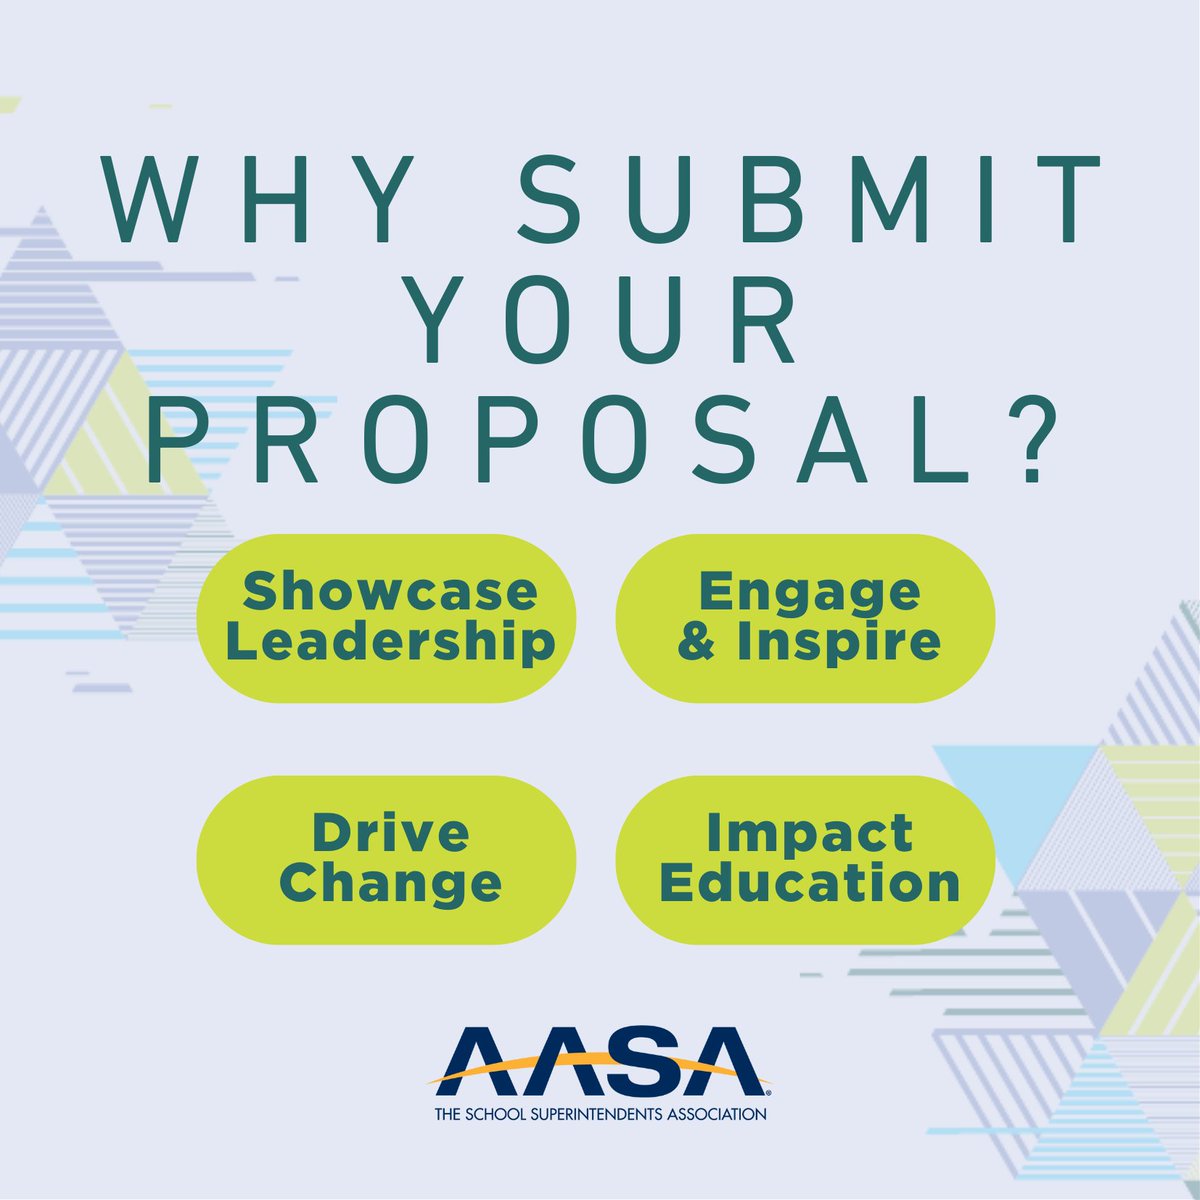 We want to hear from you! Submit your proposals for the 2025 National Conference on Education happening March 6-8 in New Orleans, LA. Submissions are due by 11:59 pm ET on May 31, 2024. Learn more: aasa.org/cfp #NCE2025 #FutureDrivenLeadership #PublicEducation